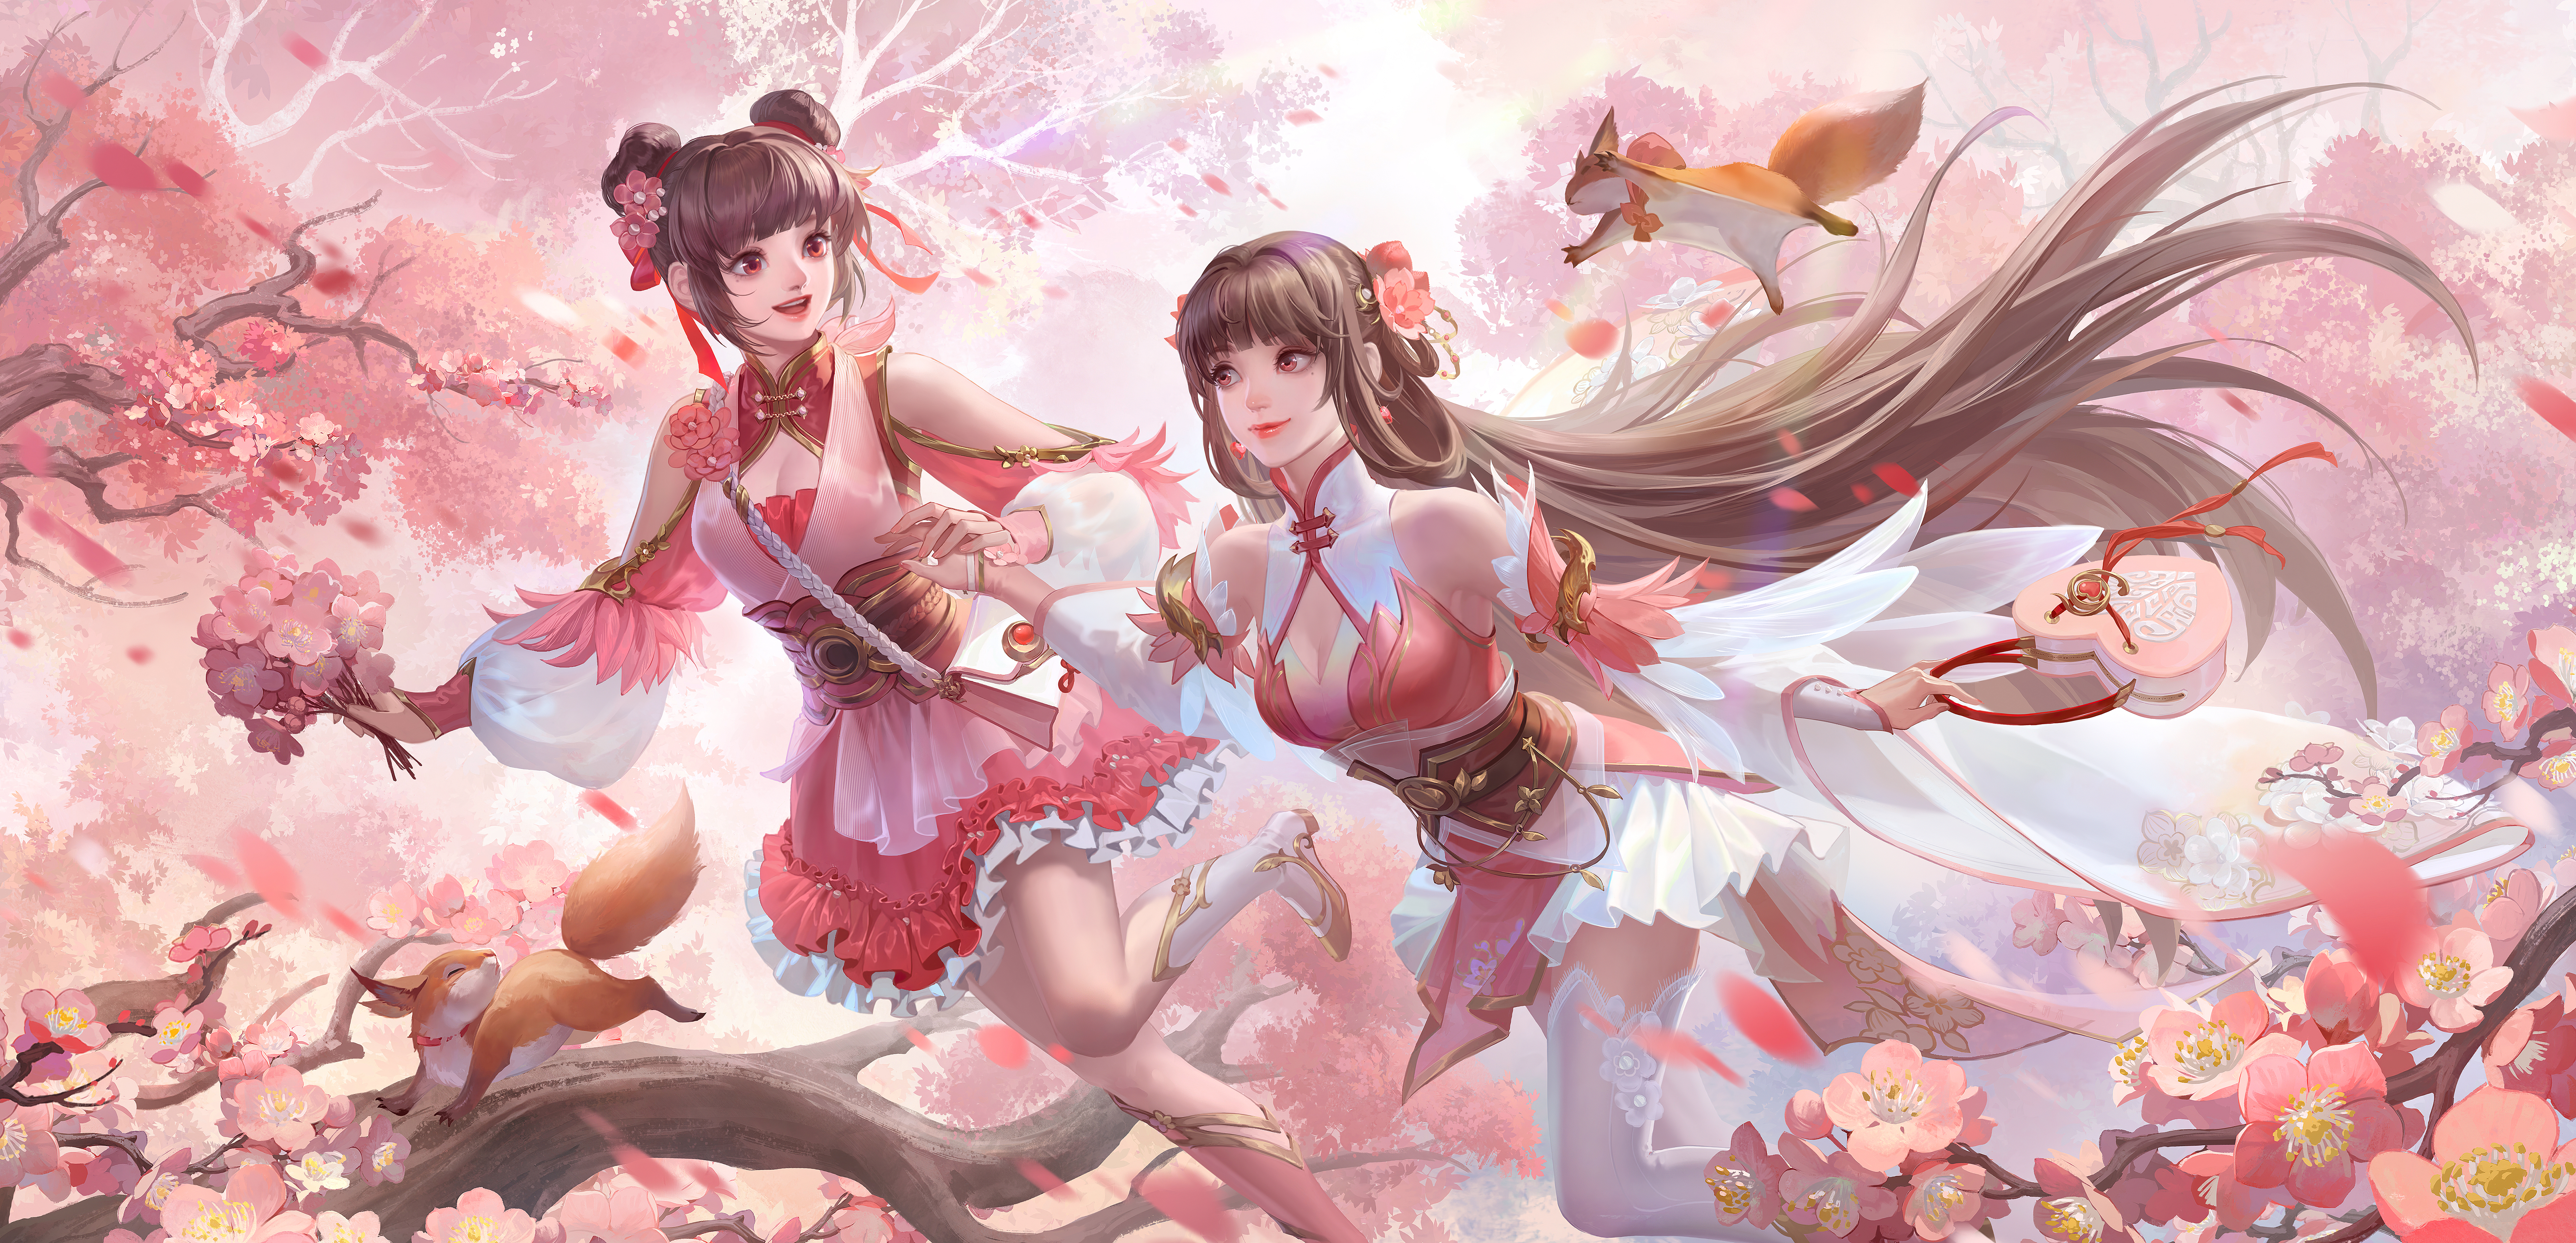 General 7669x3700 video game characters artwork video games Honor of Kings long hair video game girls dress holding hands smiling flower in hair twin buns squirrel animals branch flowers